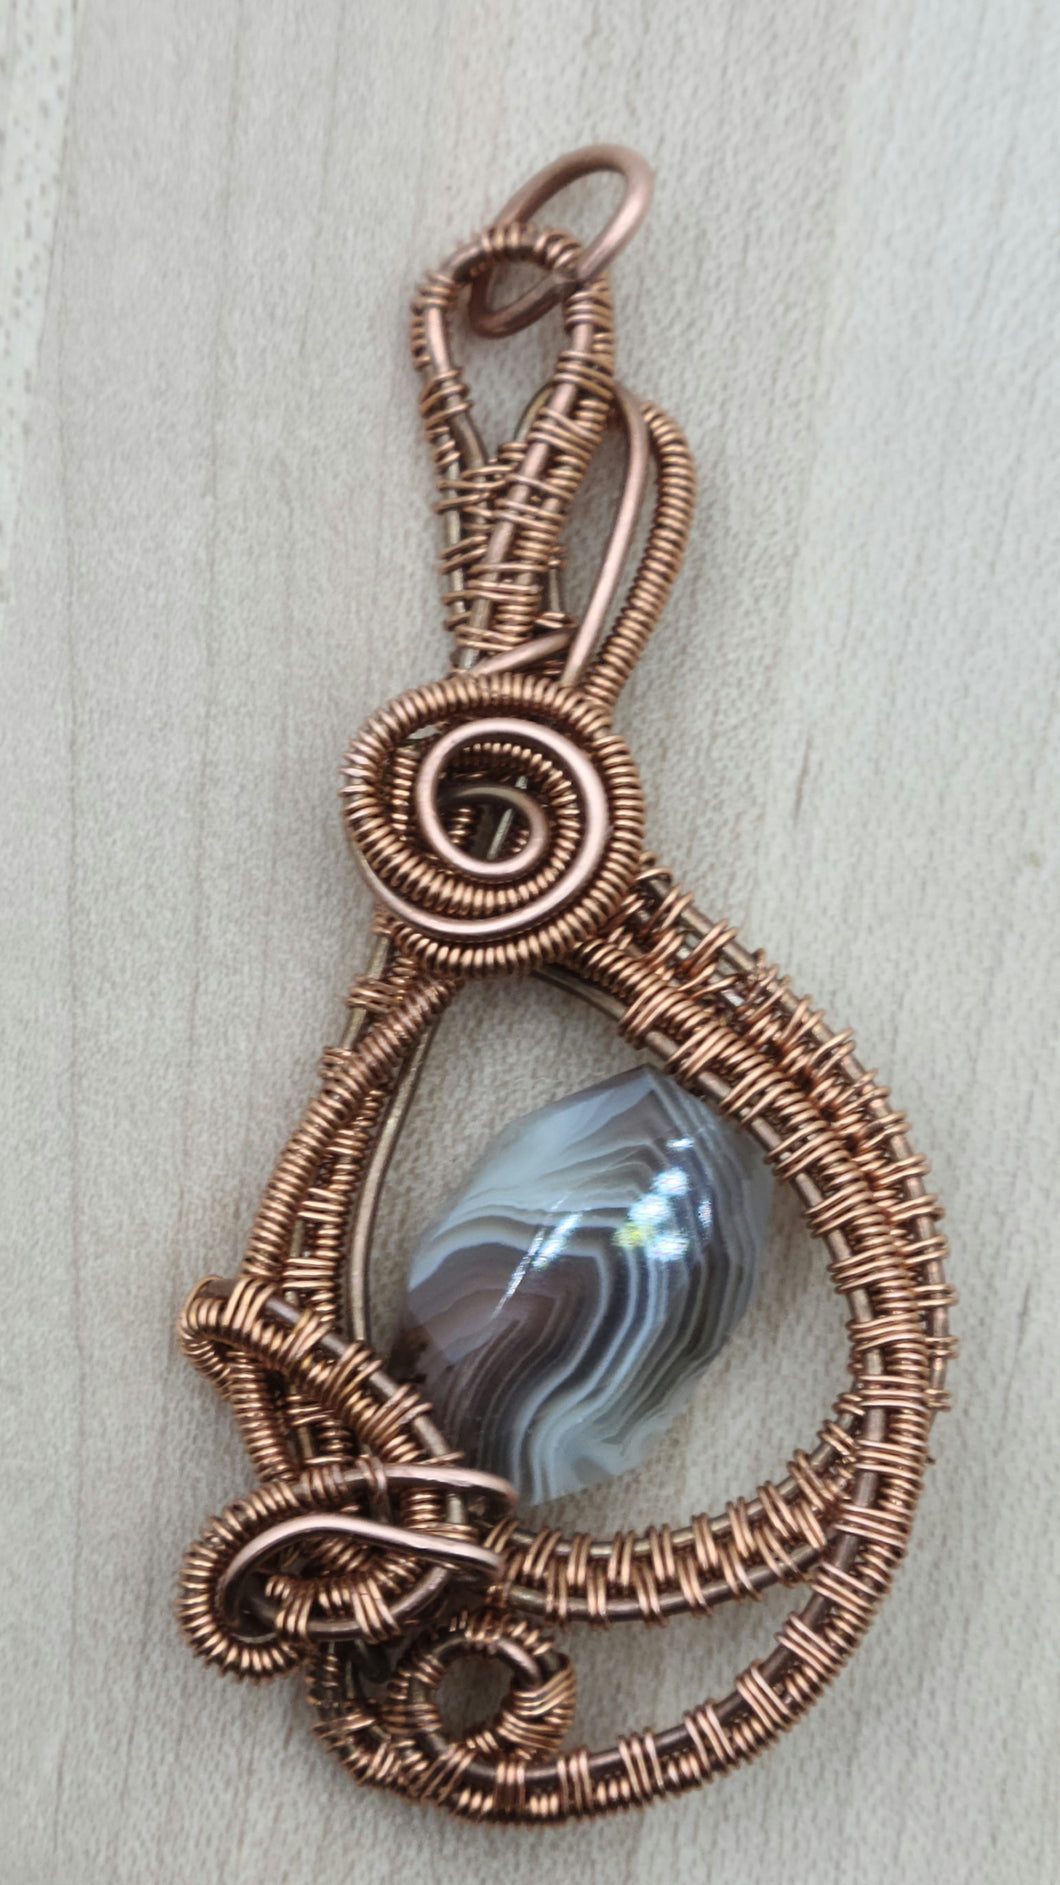 Woven wire framed botswana nugget pendant